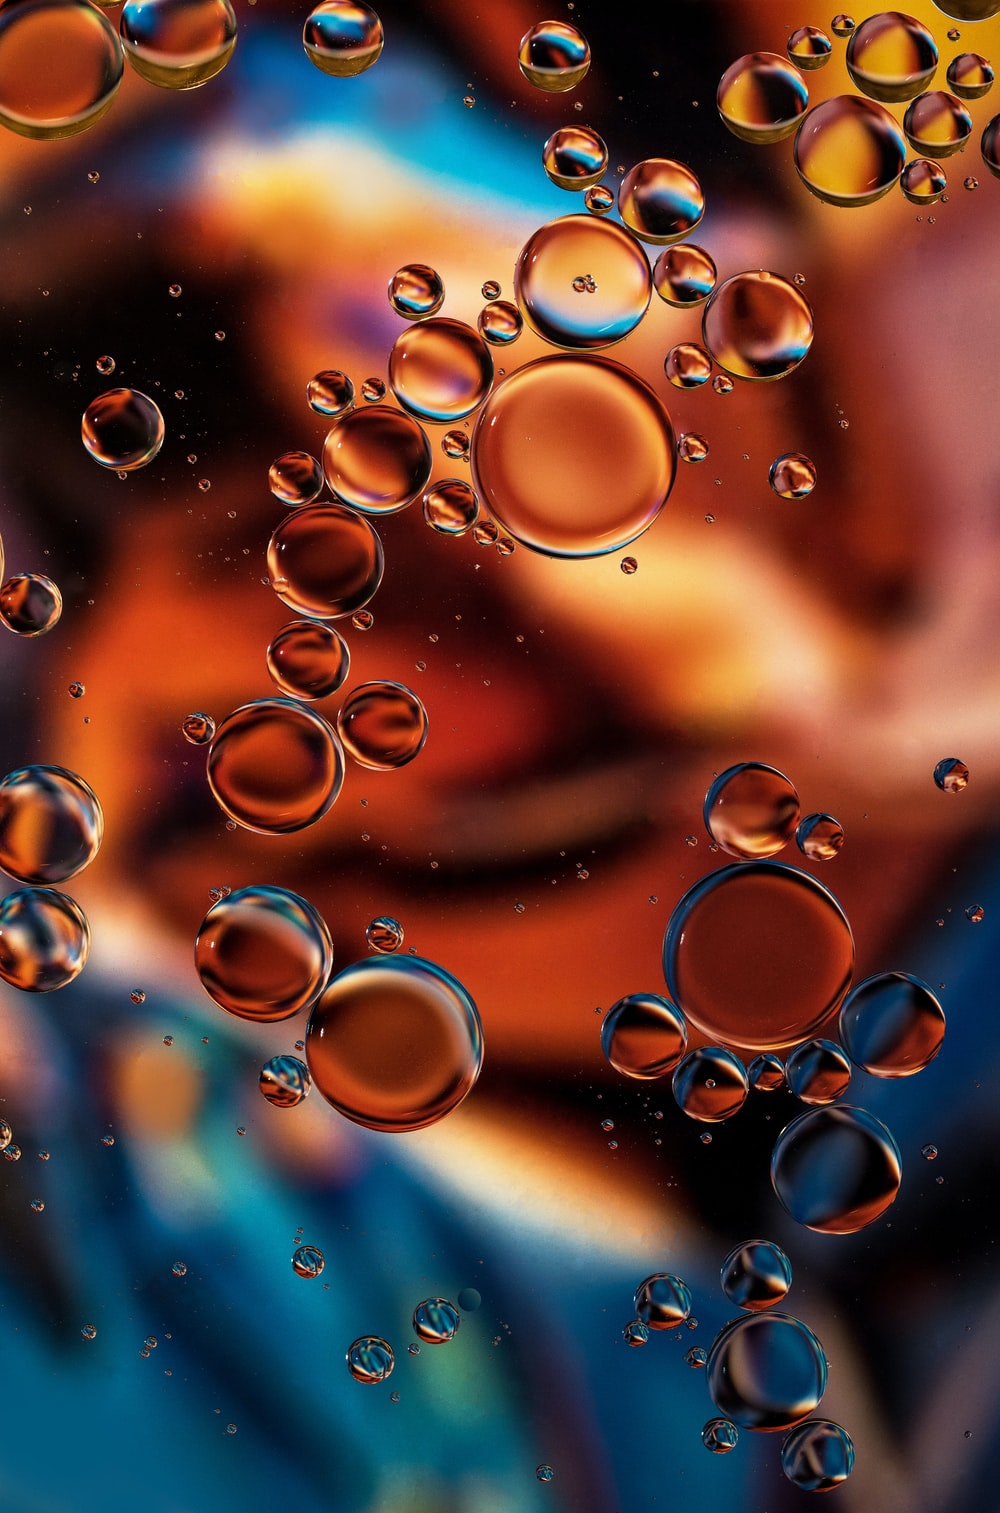 Oil And Water Picture. Download Free Image